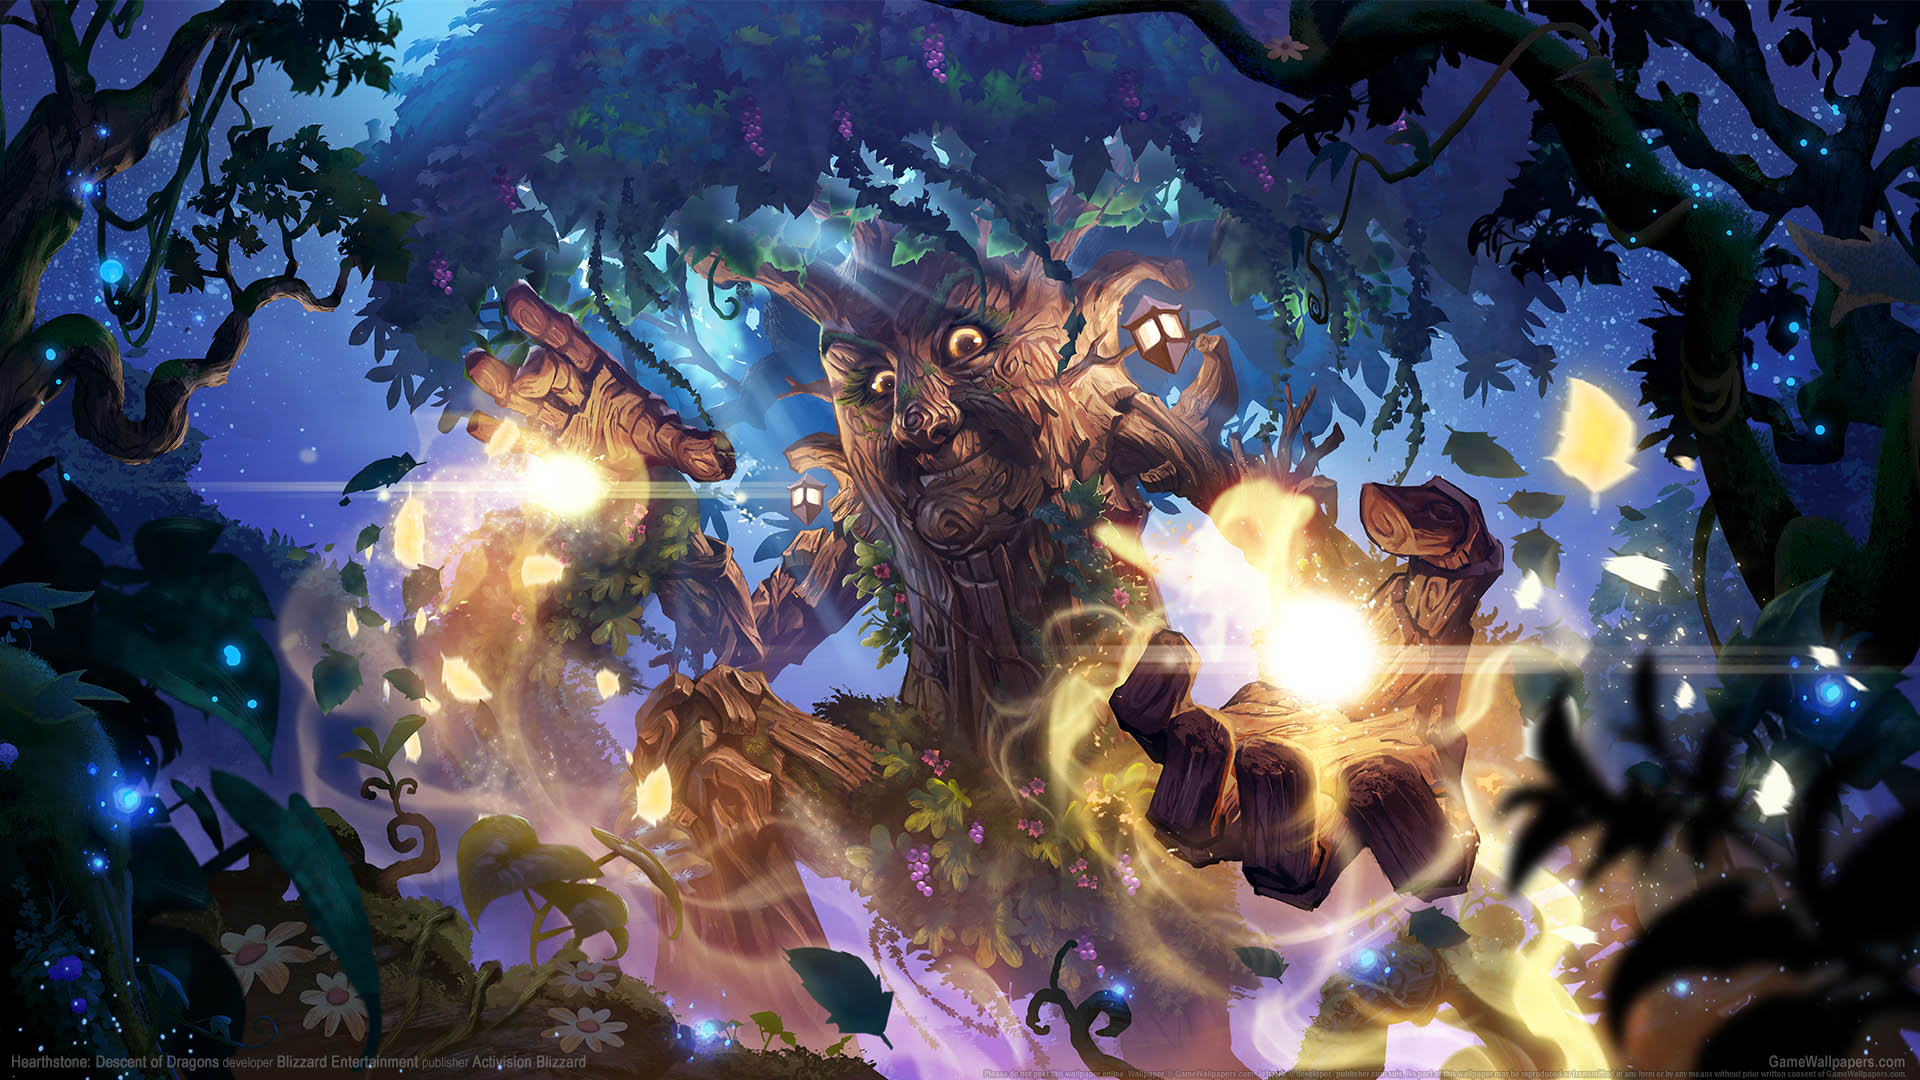 Hearthstone: Descent of Dragons achtergrond 02 1920x1080